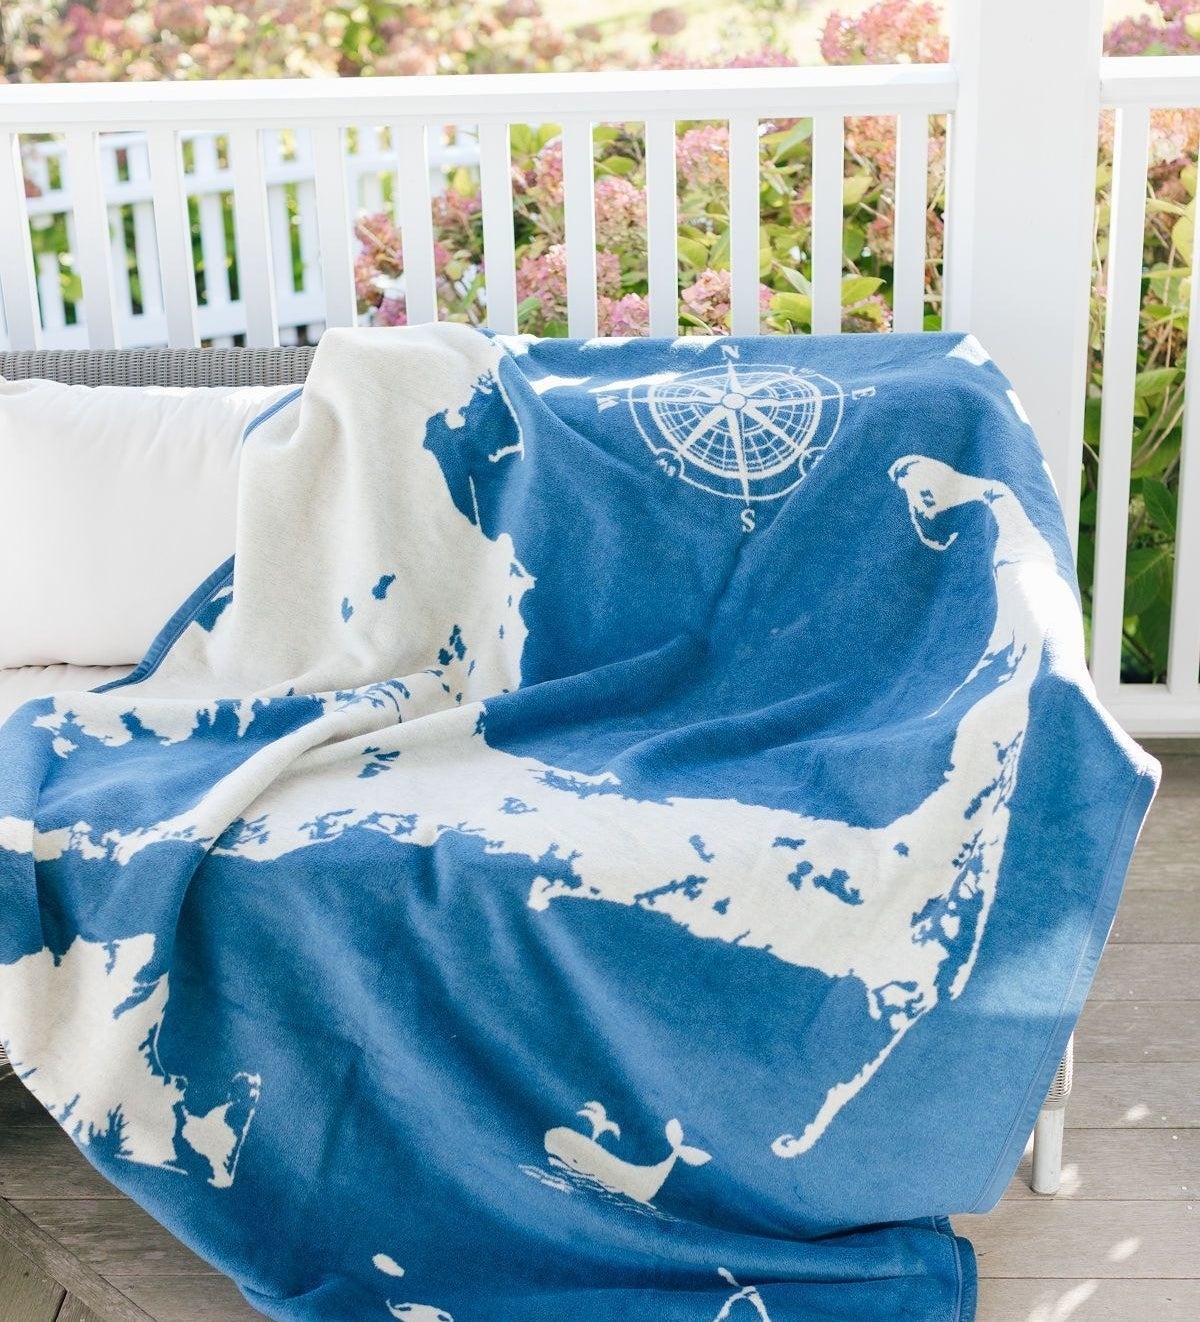 the blue blanket with Cape Cod design 